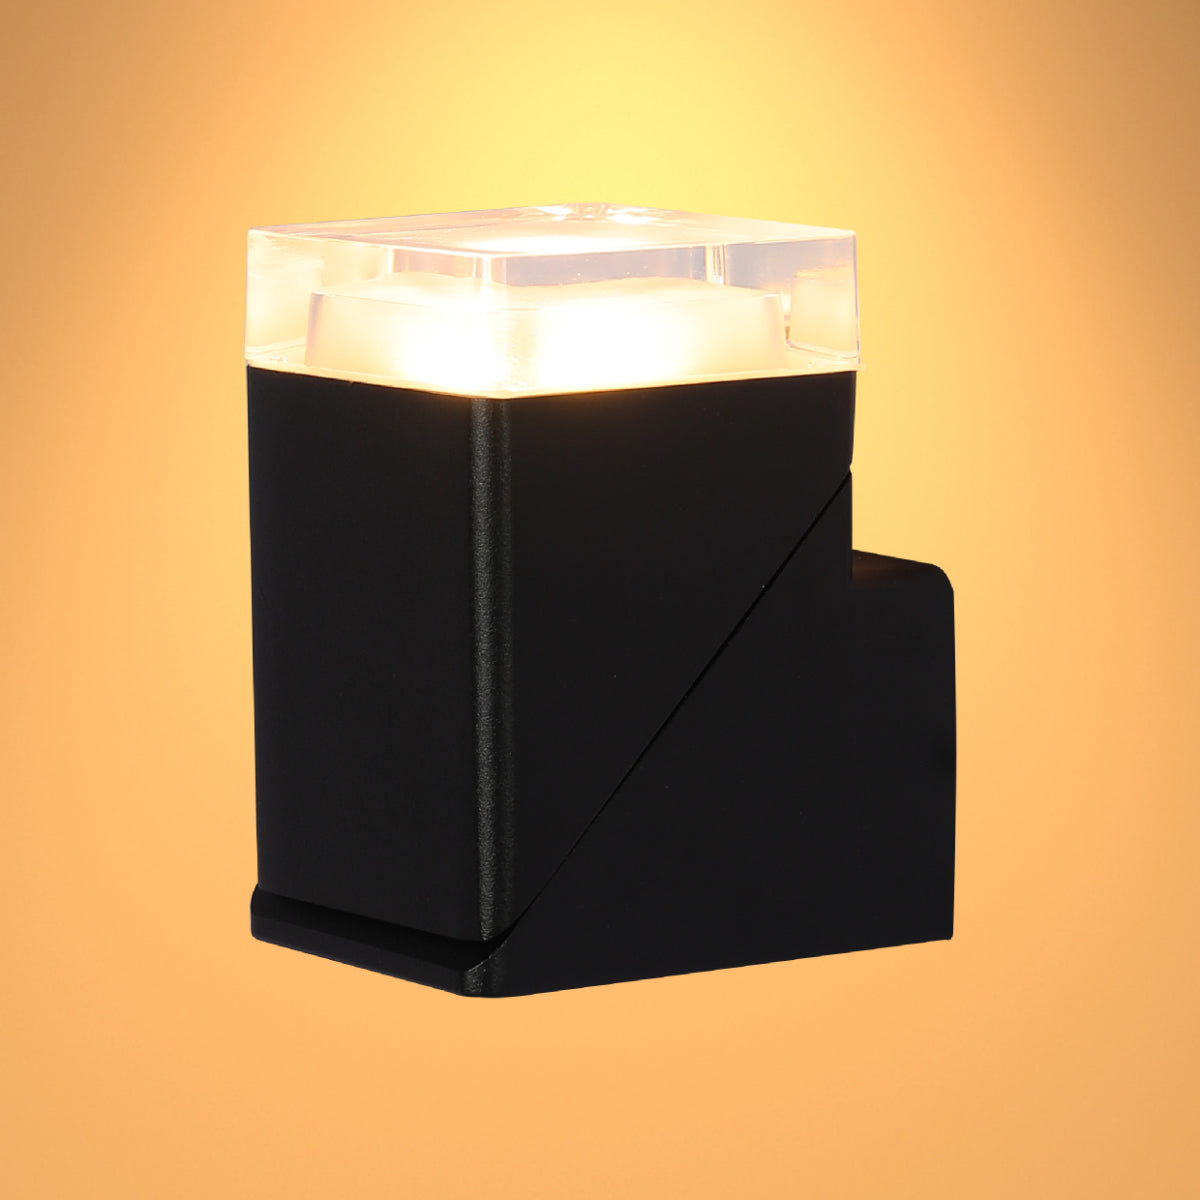 Main image of Rotatable Cubes Outdoor LED Wall Light Black 3000K Wide Beam 182-034210